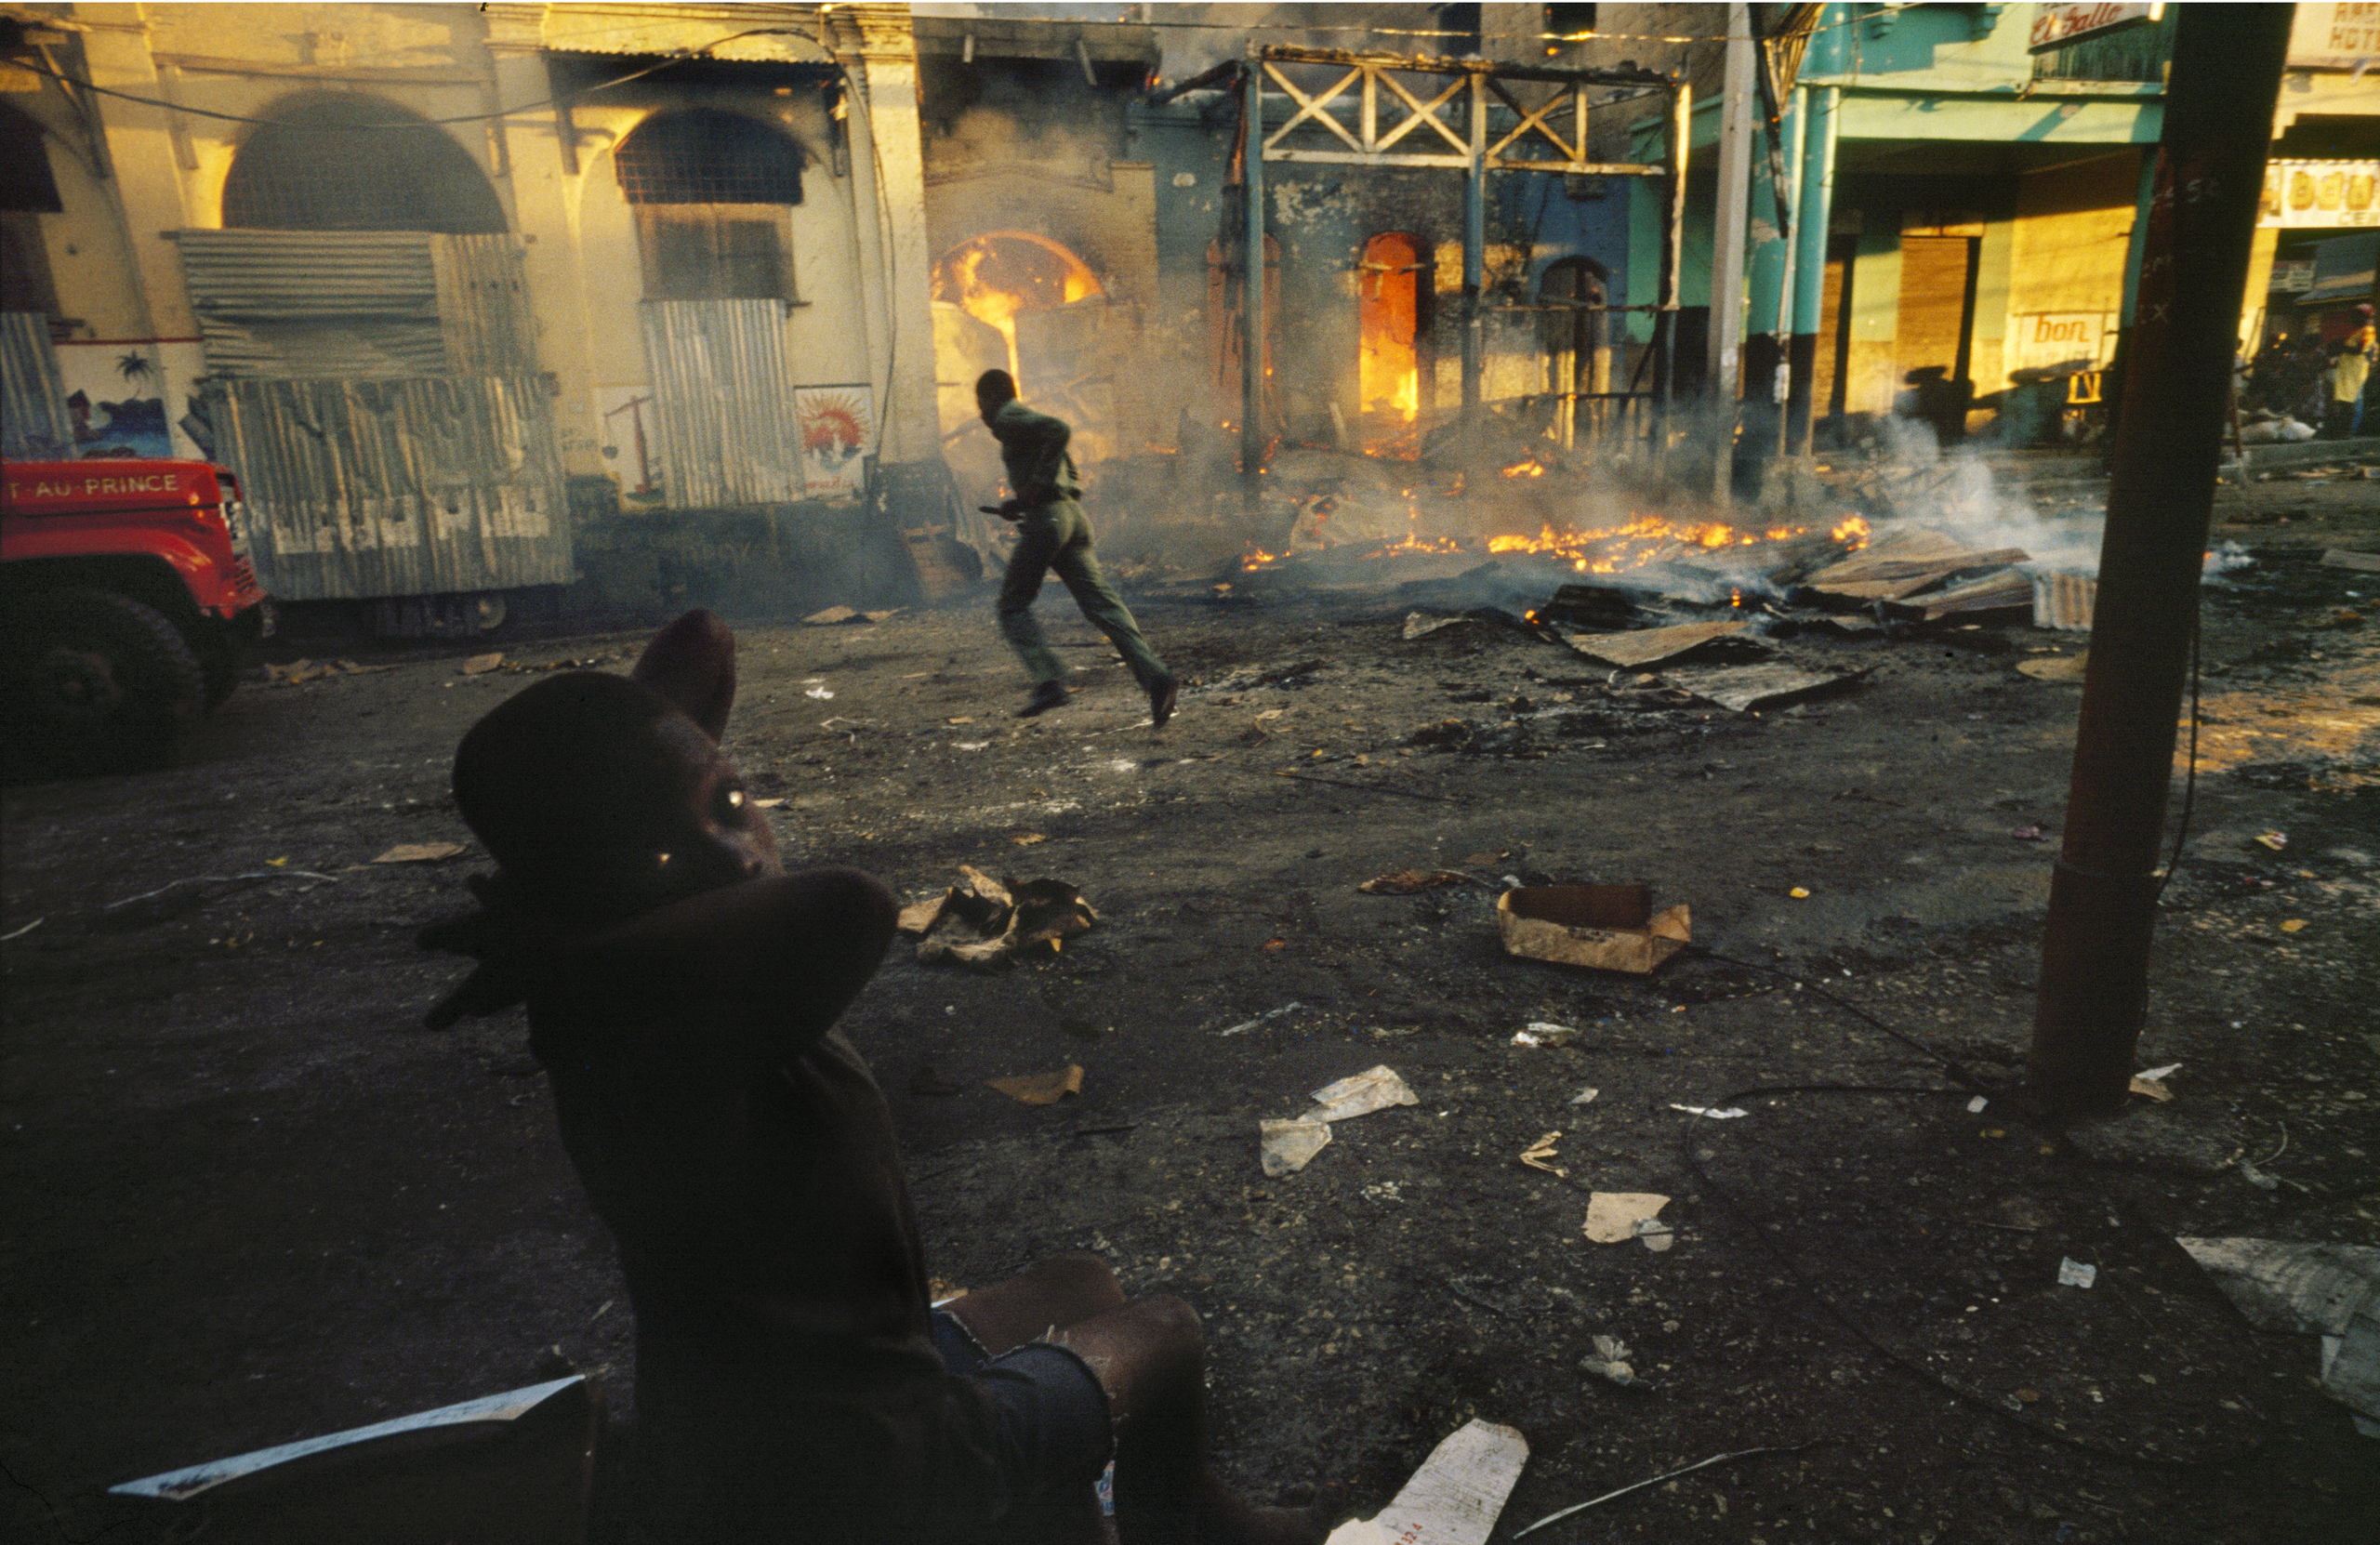 Haitian fireman runs across street to burning buildings as a child
                              watches from a front row seat on election day in 
                              January 1988 in Pt-au-Prince, Haiti. Haitians set buildings on fire to protest against presidential elections they felt were
                              engineered by the Haitian military after elections two months earlier
                              were cancelled because of violence and massacres.